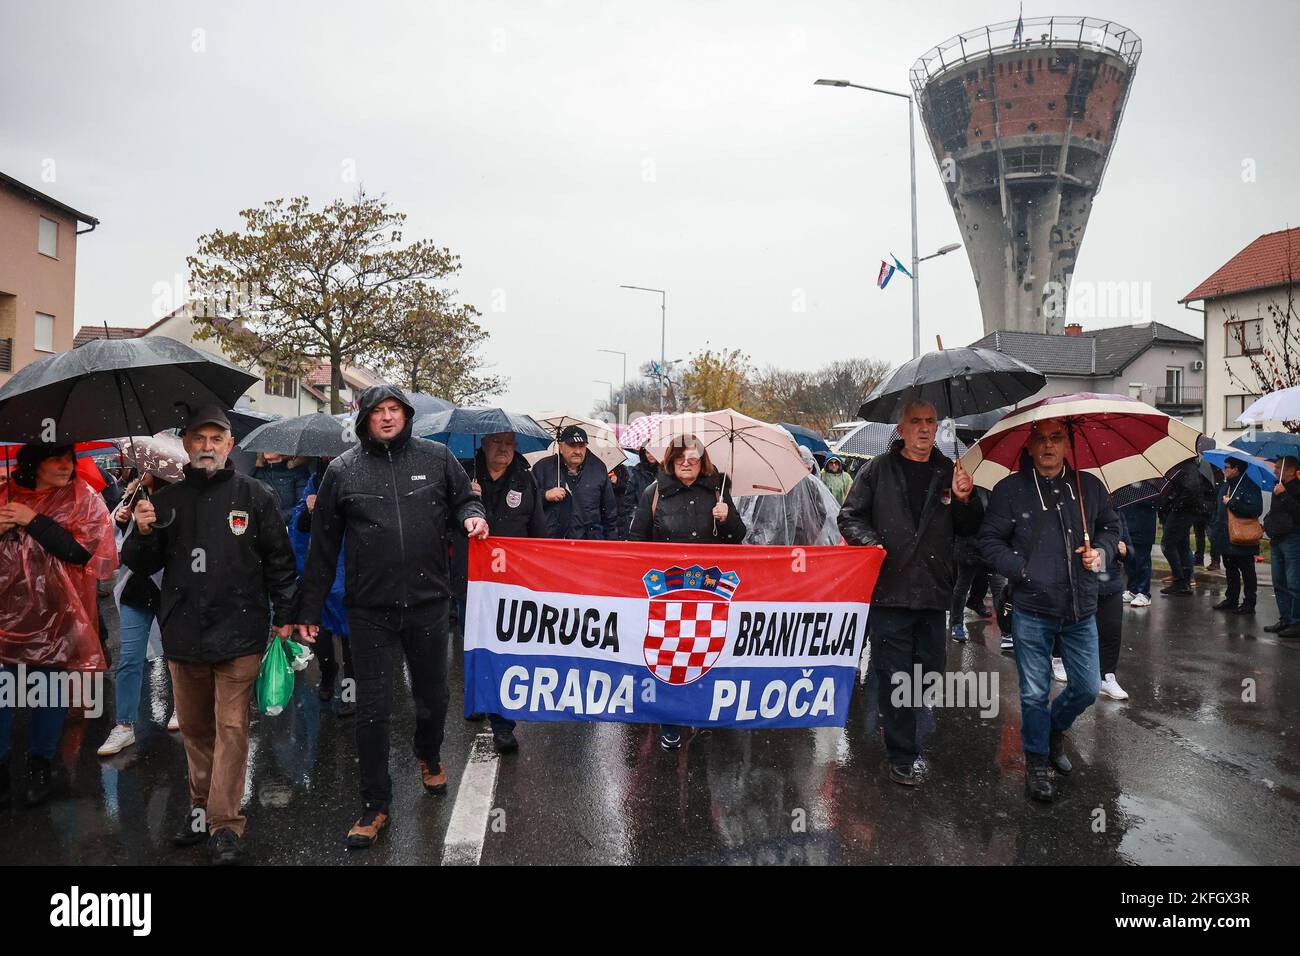 Participants of the Remembrance Day program in Vukovar, Croatia on Nov. 18, 2022. Today marks the 31st anniversary of the Day of Remembrance of the Victims of Vukovar and Skabrnja in Croatia. The Battle of Vukovar was the largest battle in the Homeland War, which lasted from 1991 to 1995. It was an 87-day siege of the Croatian city of Vukovar by the Yugoslav People's Army, with the help of Serb paramilitary forces from August to November 1991 during the Homeland War. The battle ended with the destruction of Vukovar and numerous murders and persecution of the Croatian population. Photo: Davor J Stock Photo